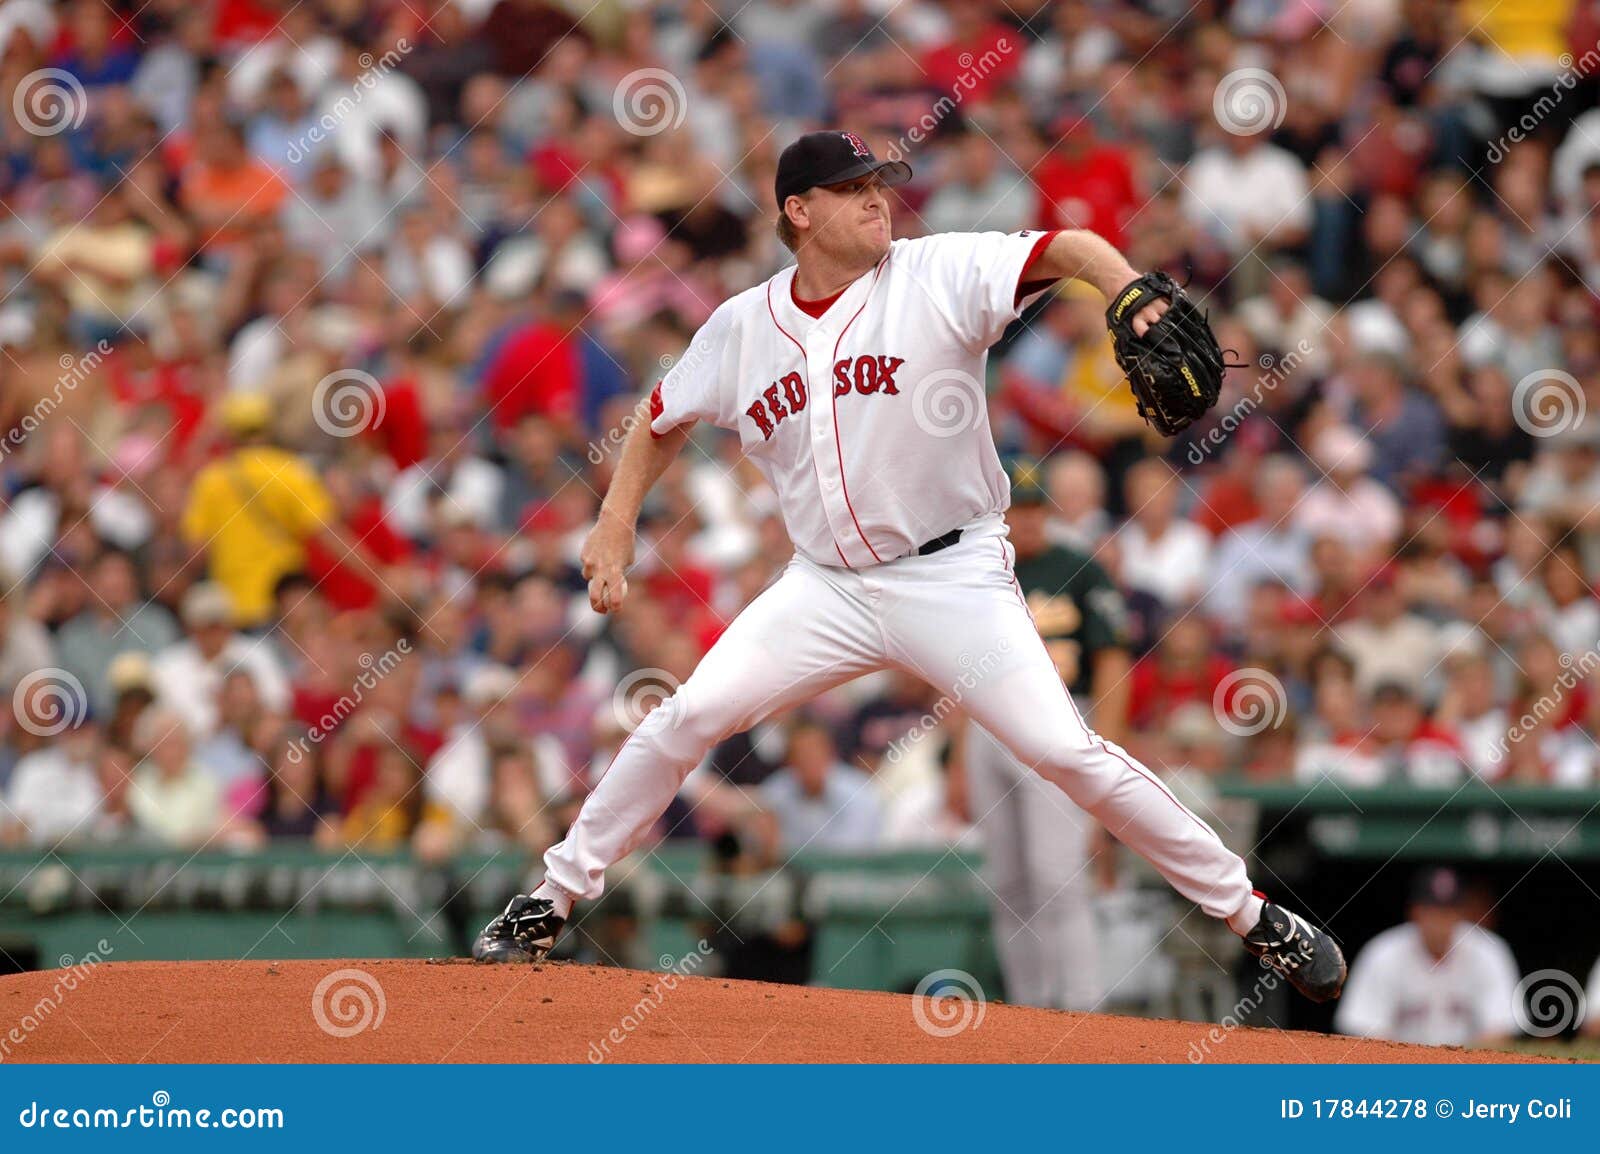 curt schilling pitching